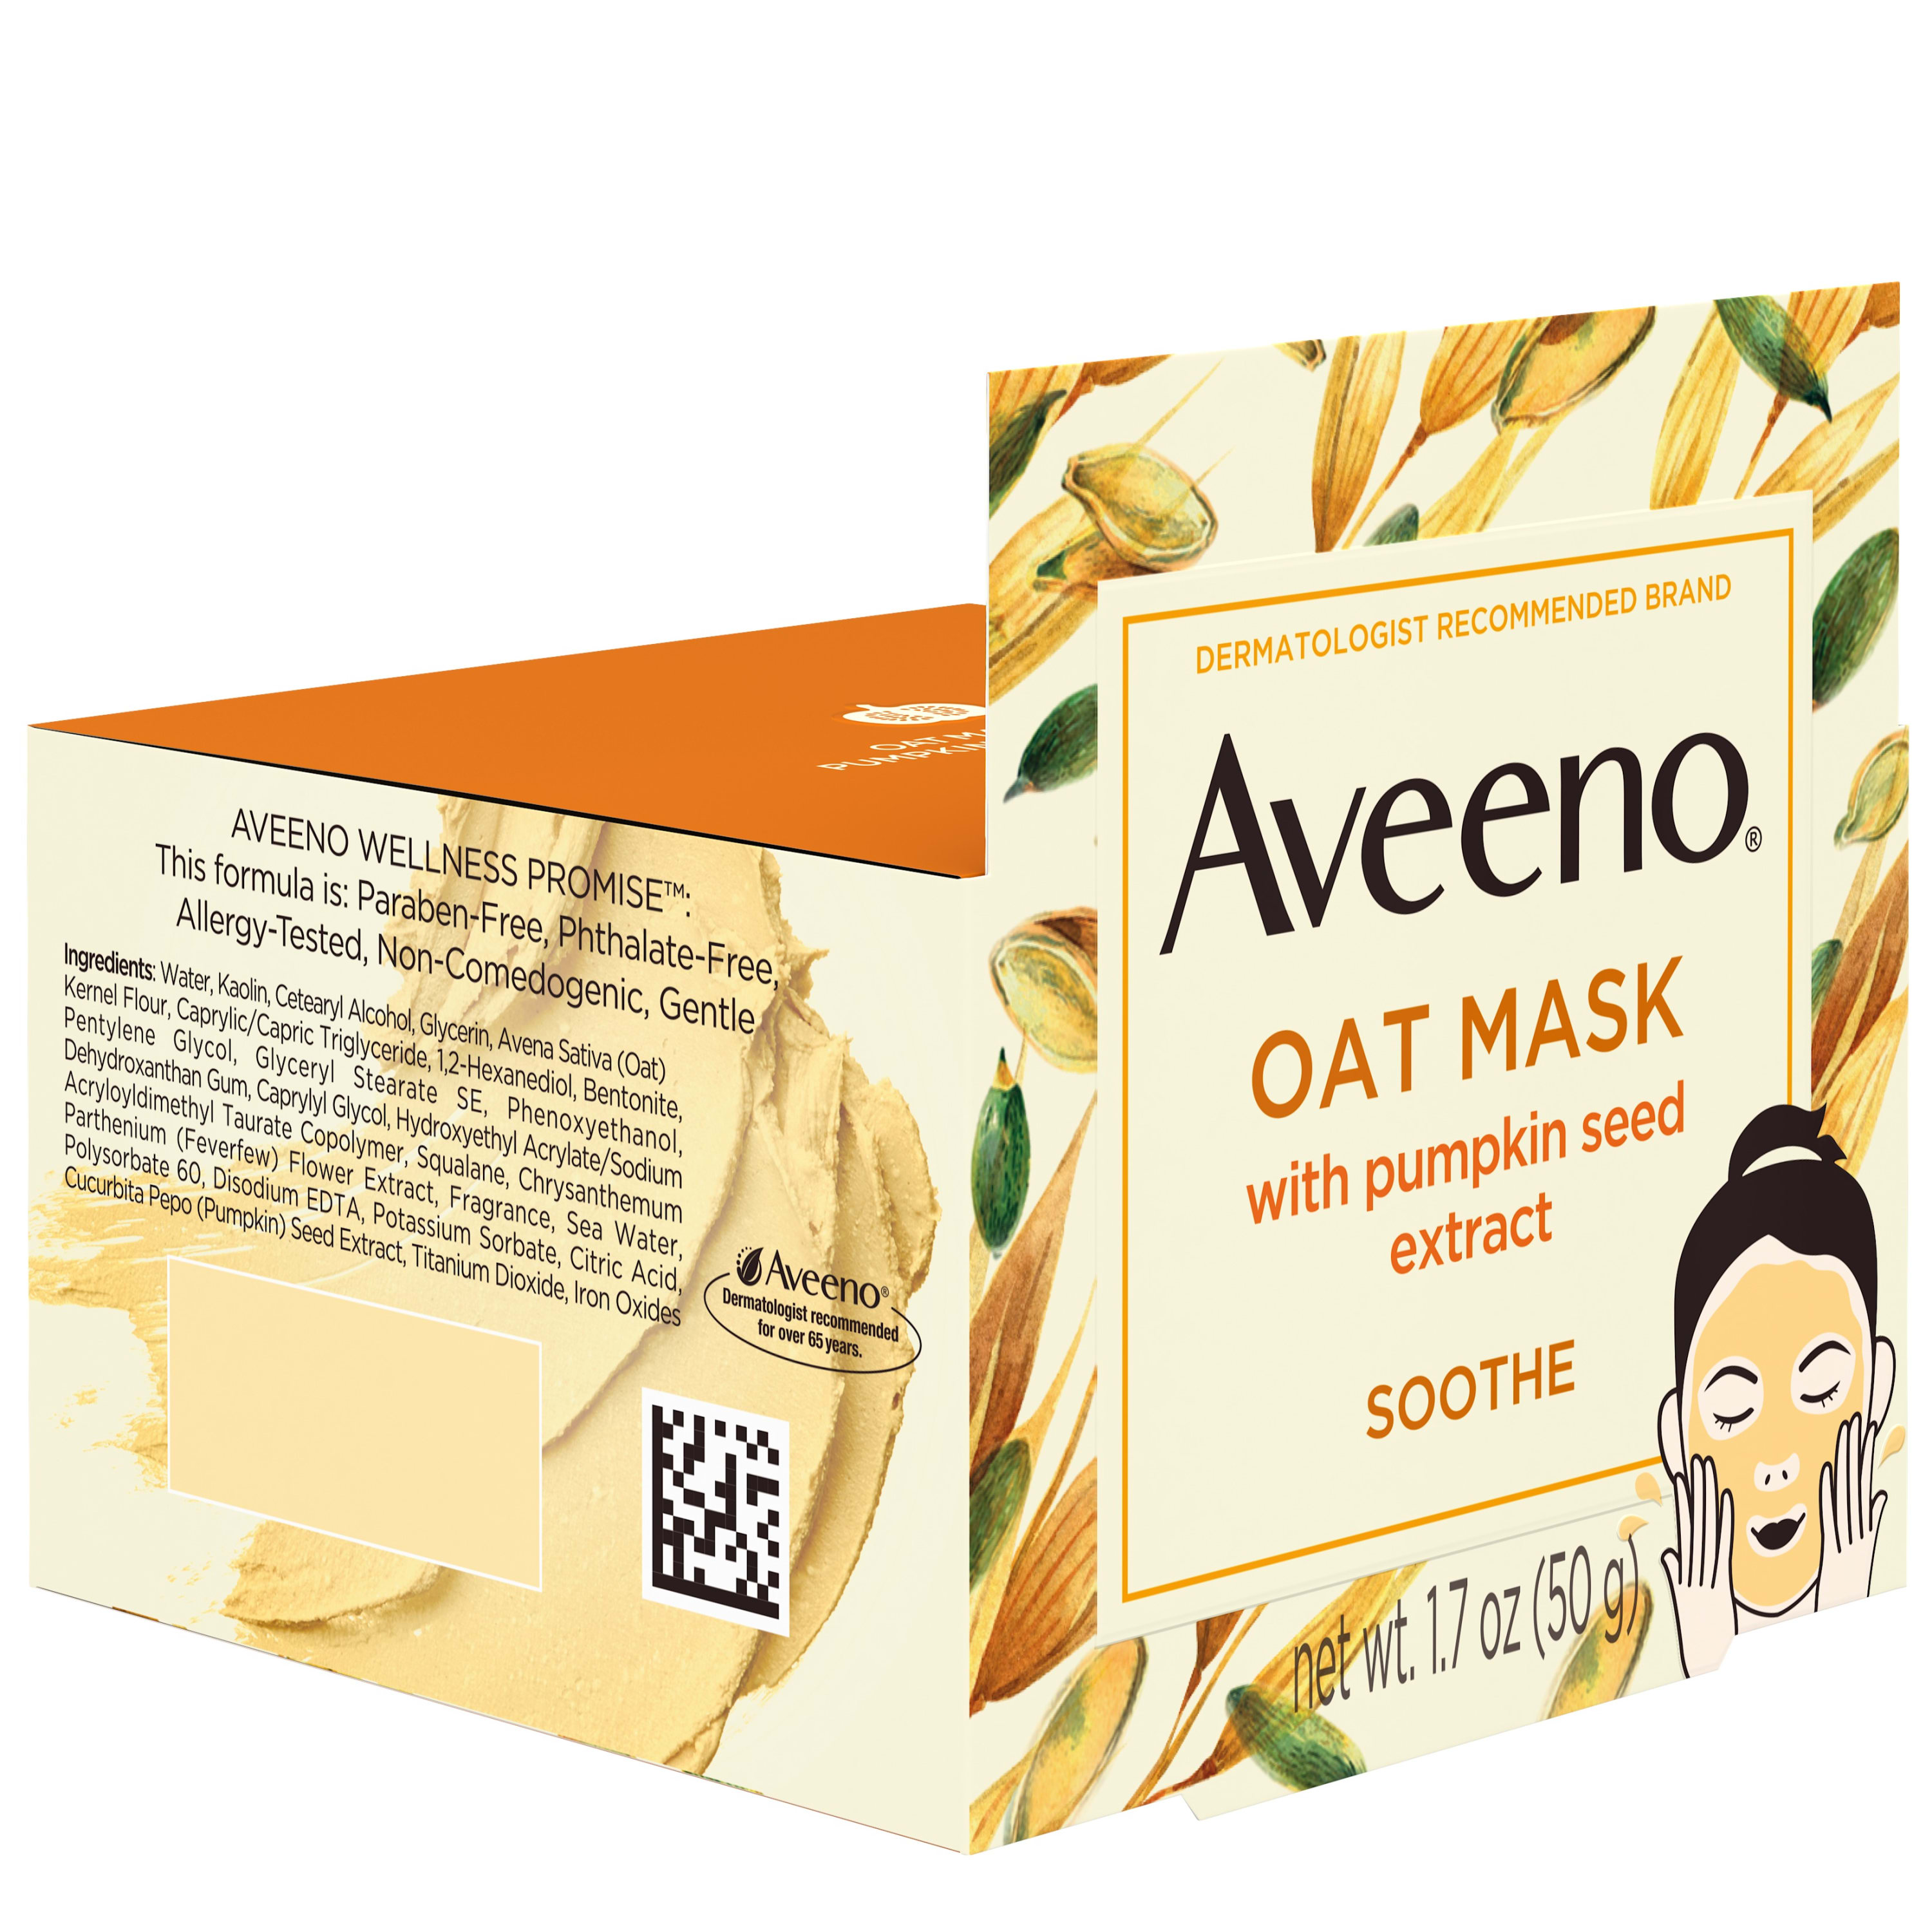 Aveeno Oat Soothing Face Mask, Pumpkin Seed and Feverfew, 1.7 oz - image 5 of 12